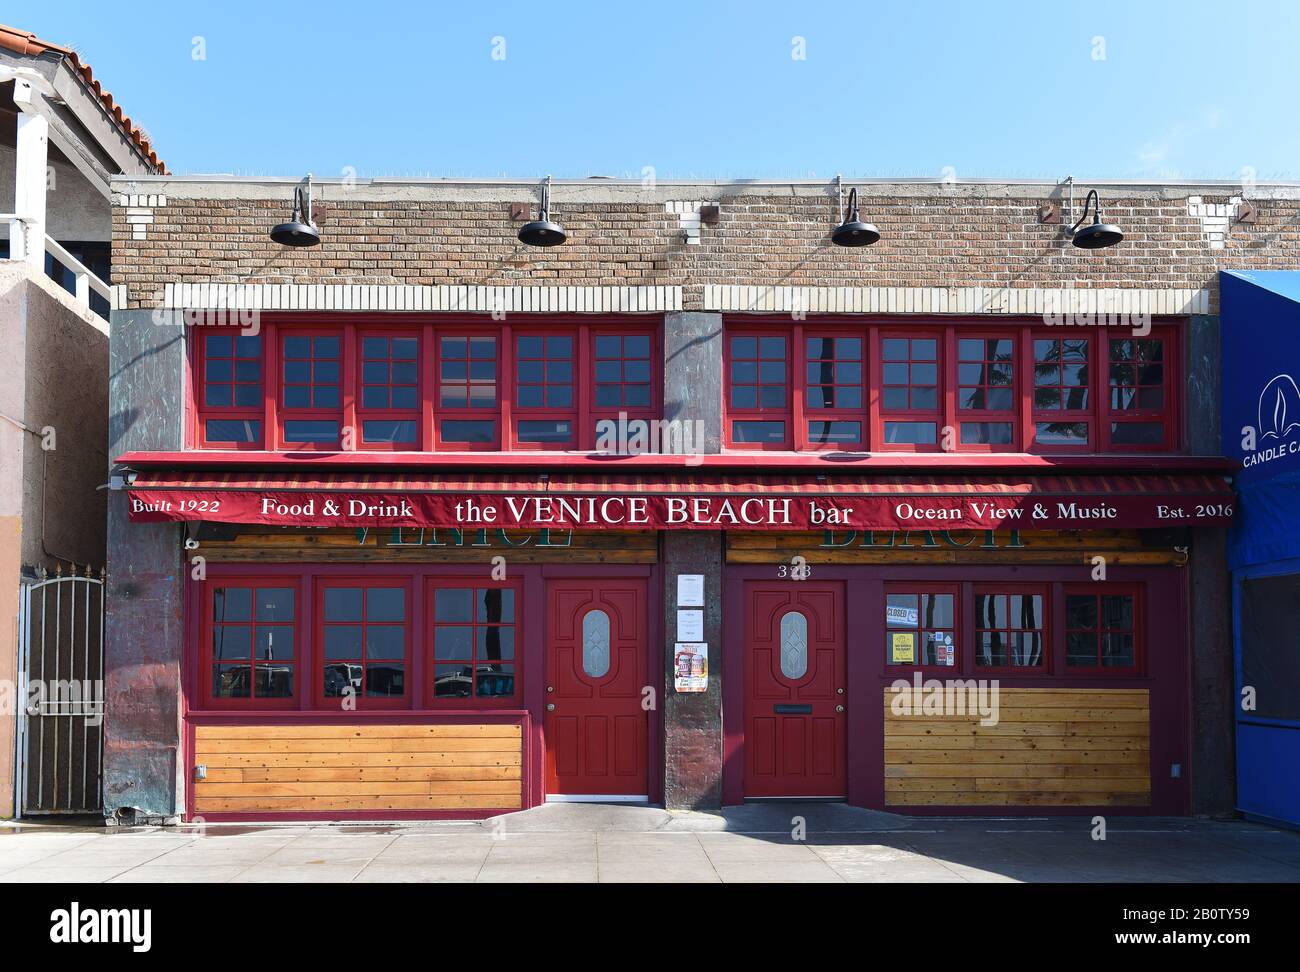 VENICE, CALIFORNIA - 17 FEB 2020: The Venice Beach Bar is one of the last standing Live Music Venues in the heart of the famed Venice Beach Boardwalk. Stock Photo